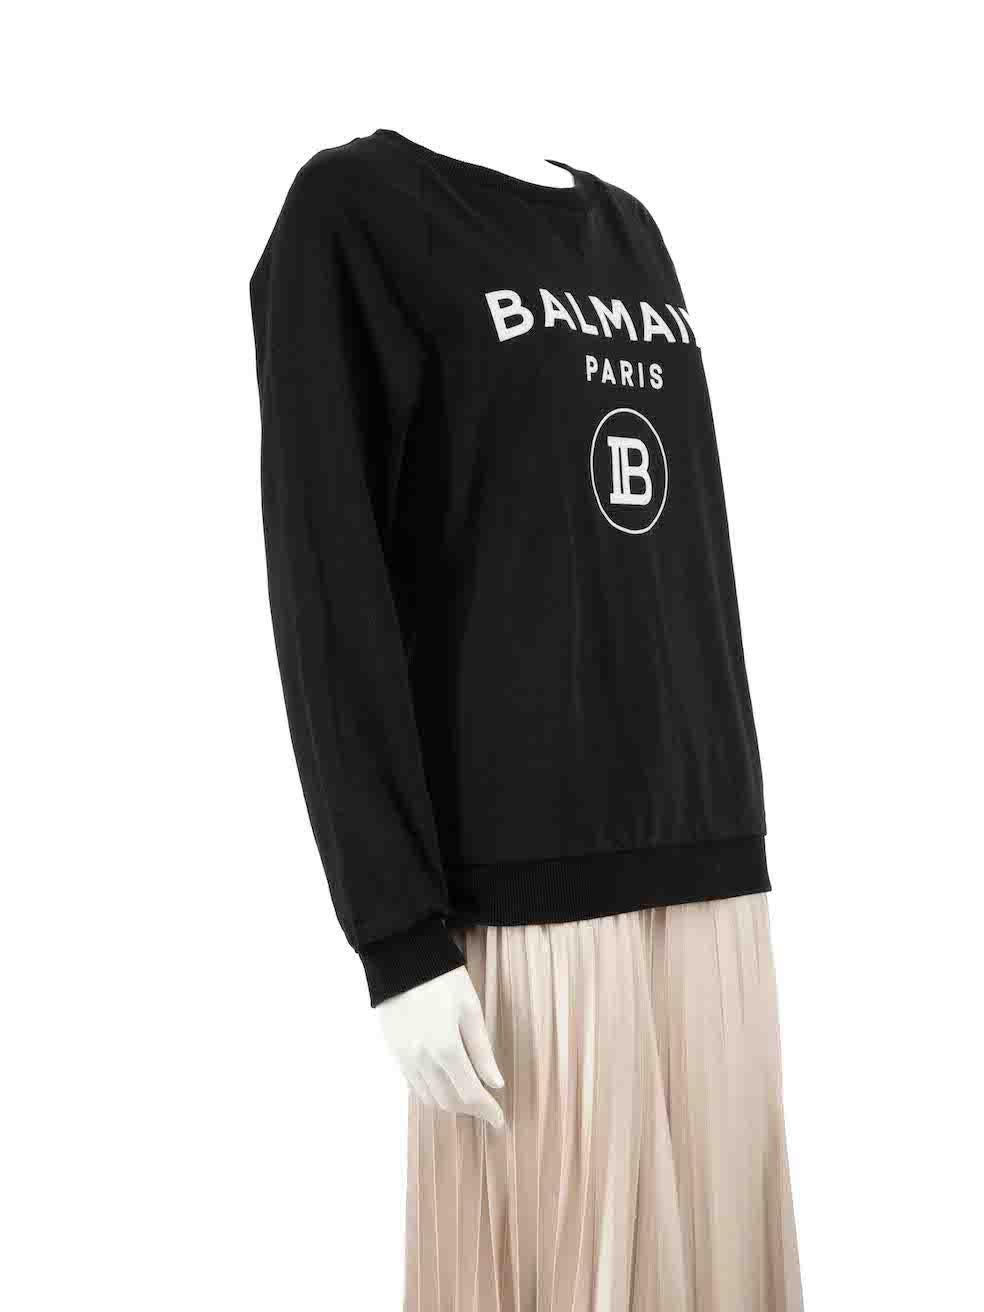 CONDITION is Very good. Minimal wear to sweatshirt is evident. Light wear to fabric surface which shows some light discolouration and wear on flocked logo and hemline on this used Balmain designer resale item.
 
 
 
 Details
 
 
 Black
 
 Cotton
 
